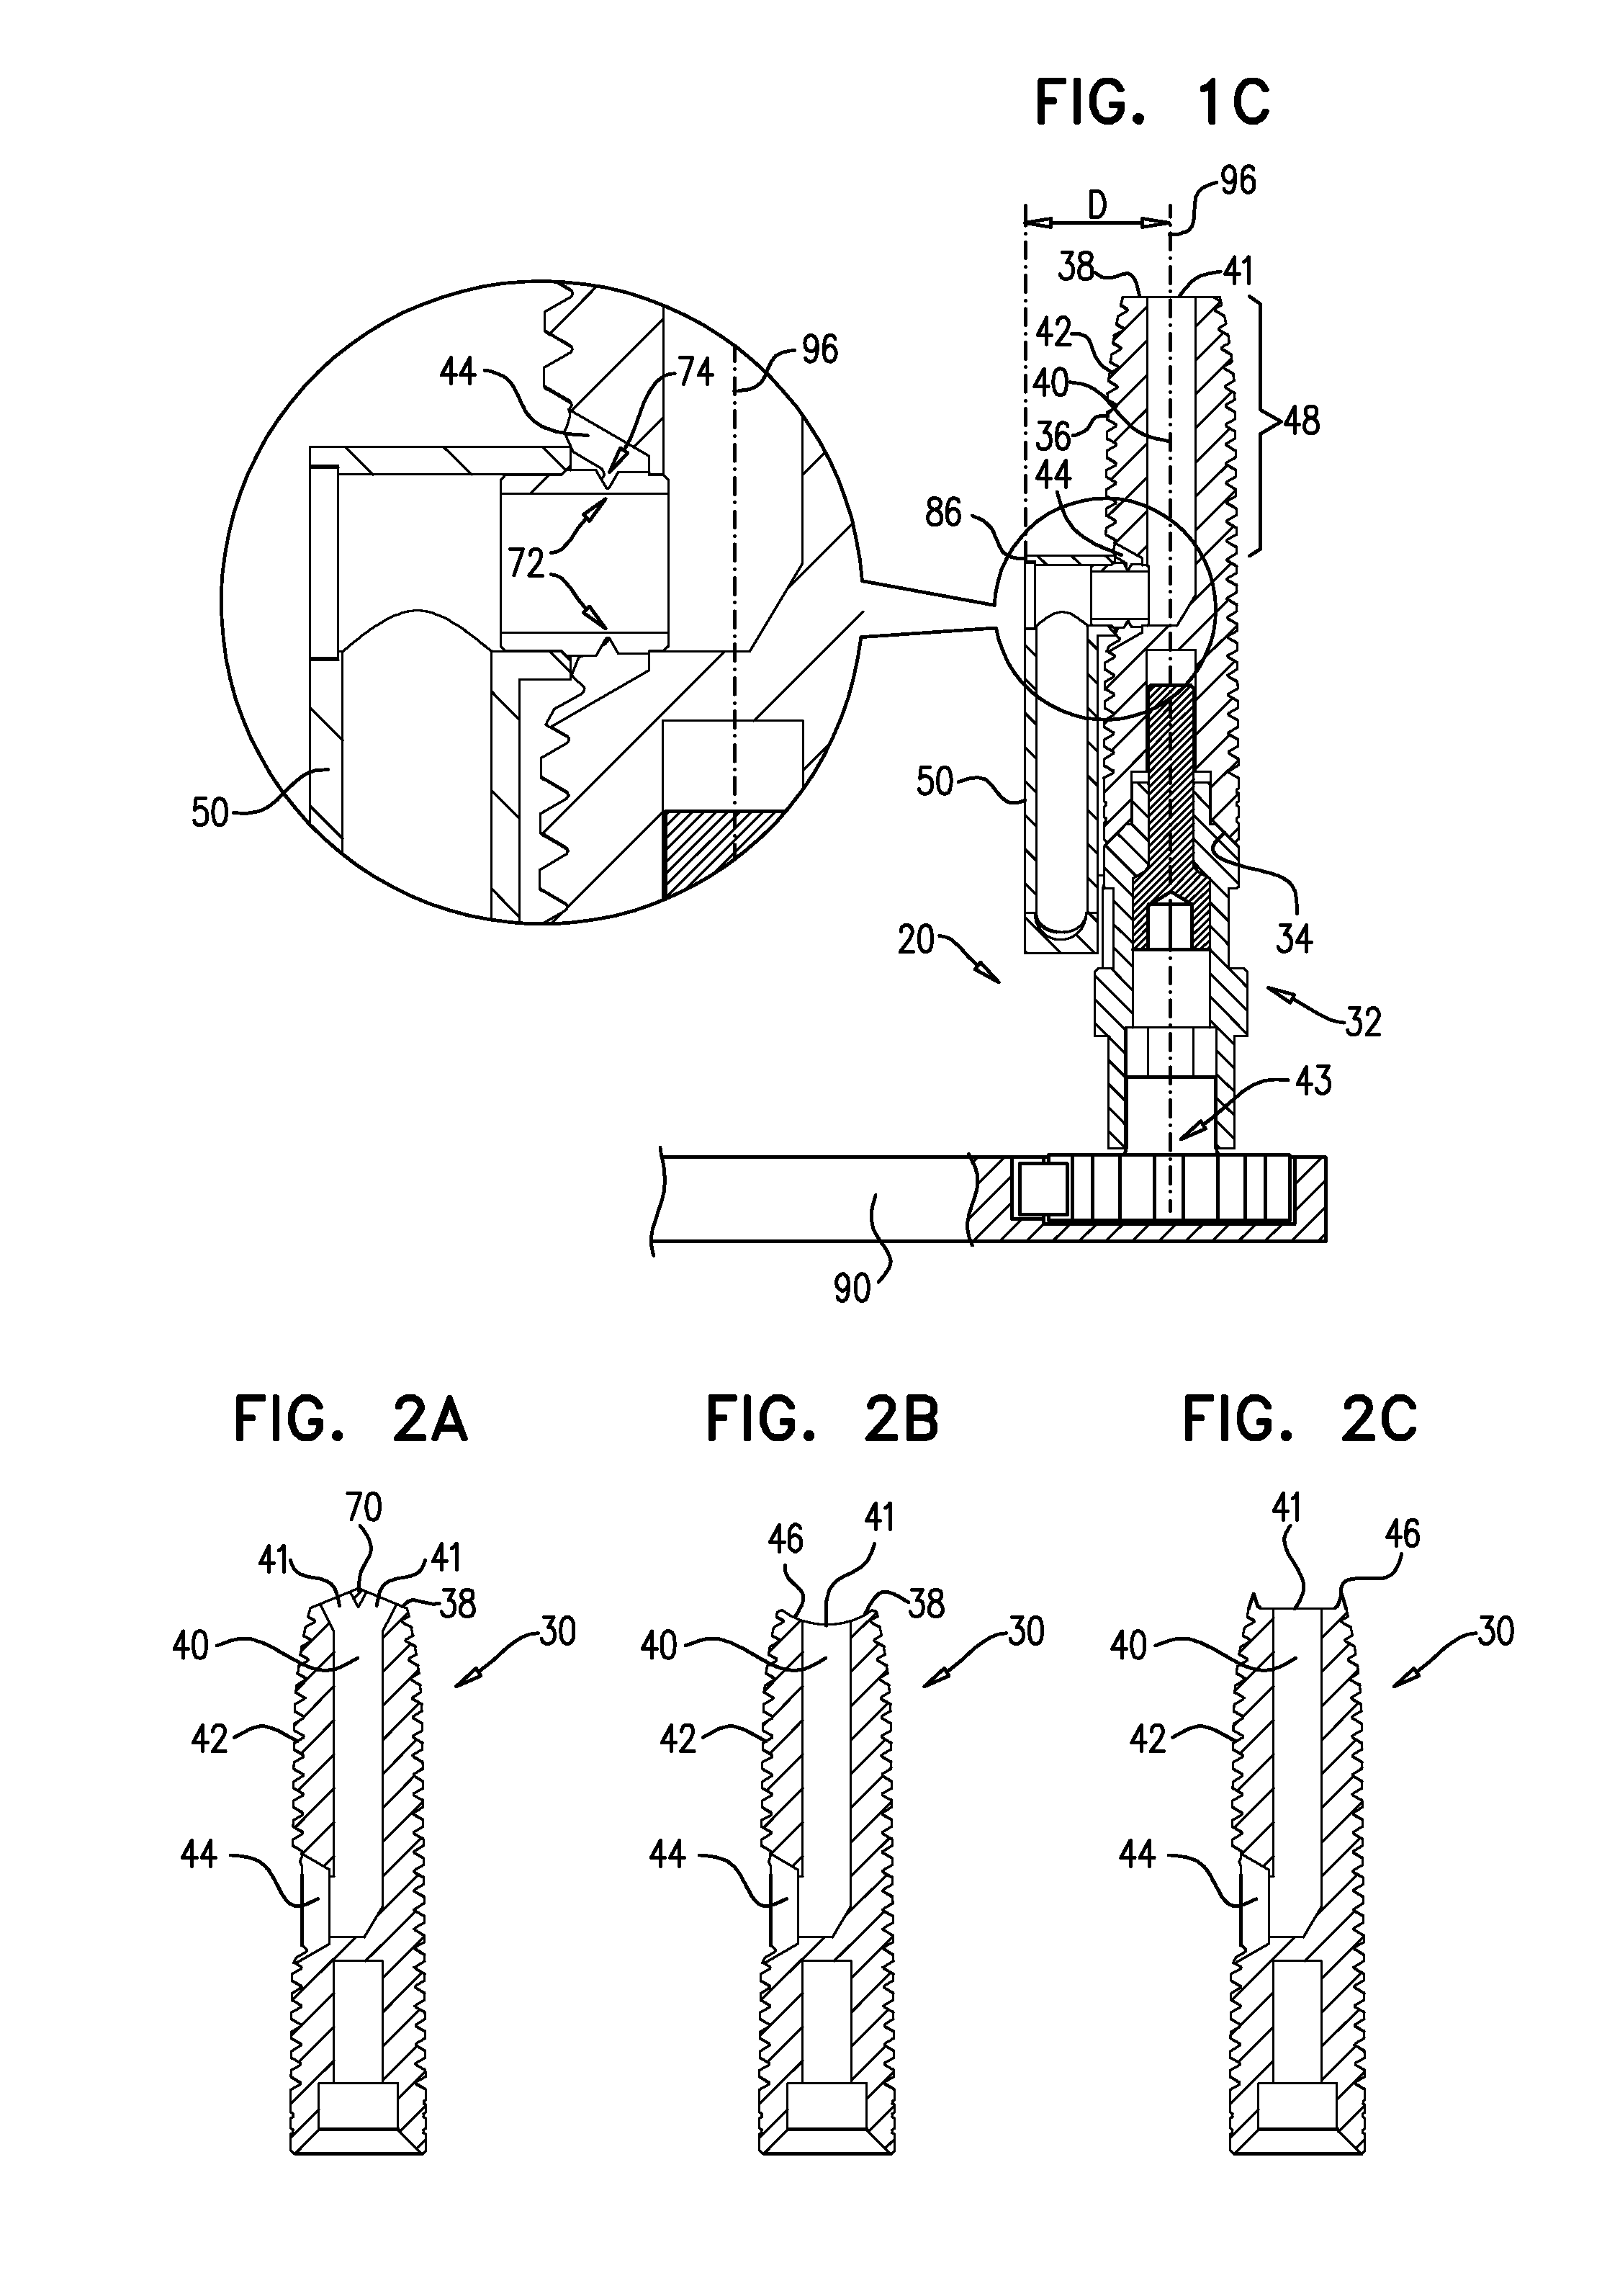 Implants, tools, and methods for sinus lift and lateral ridge augmentation